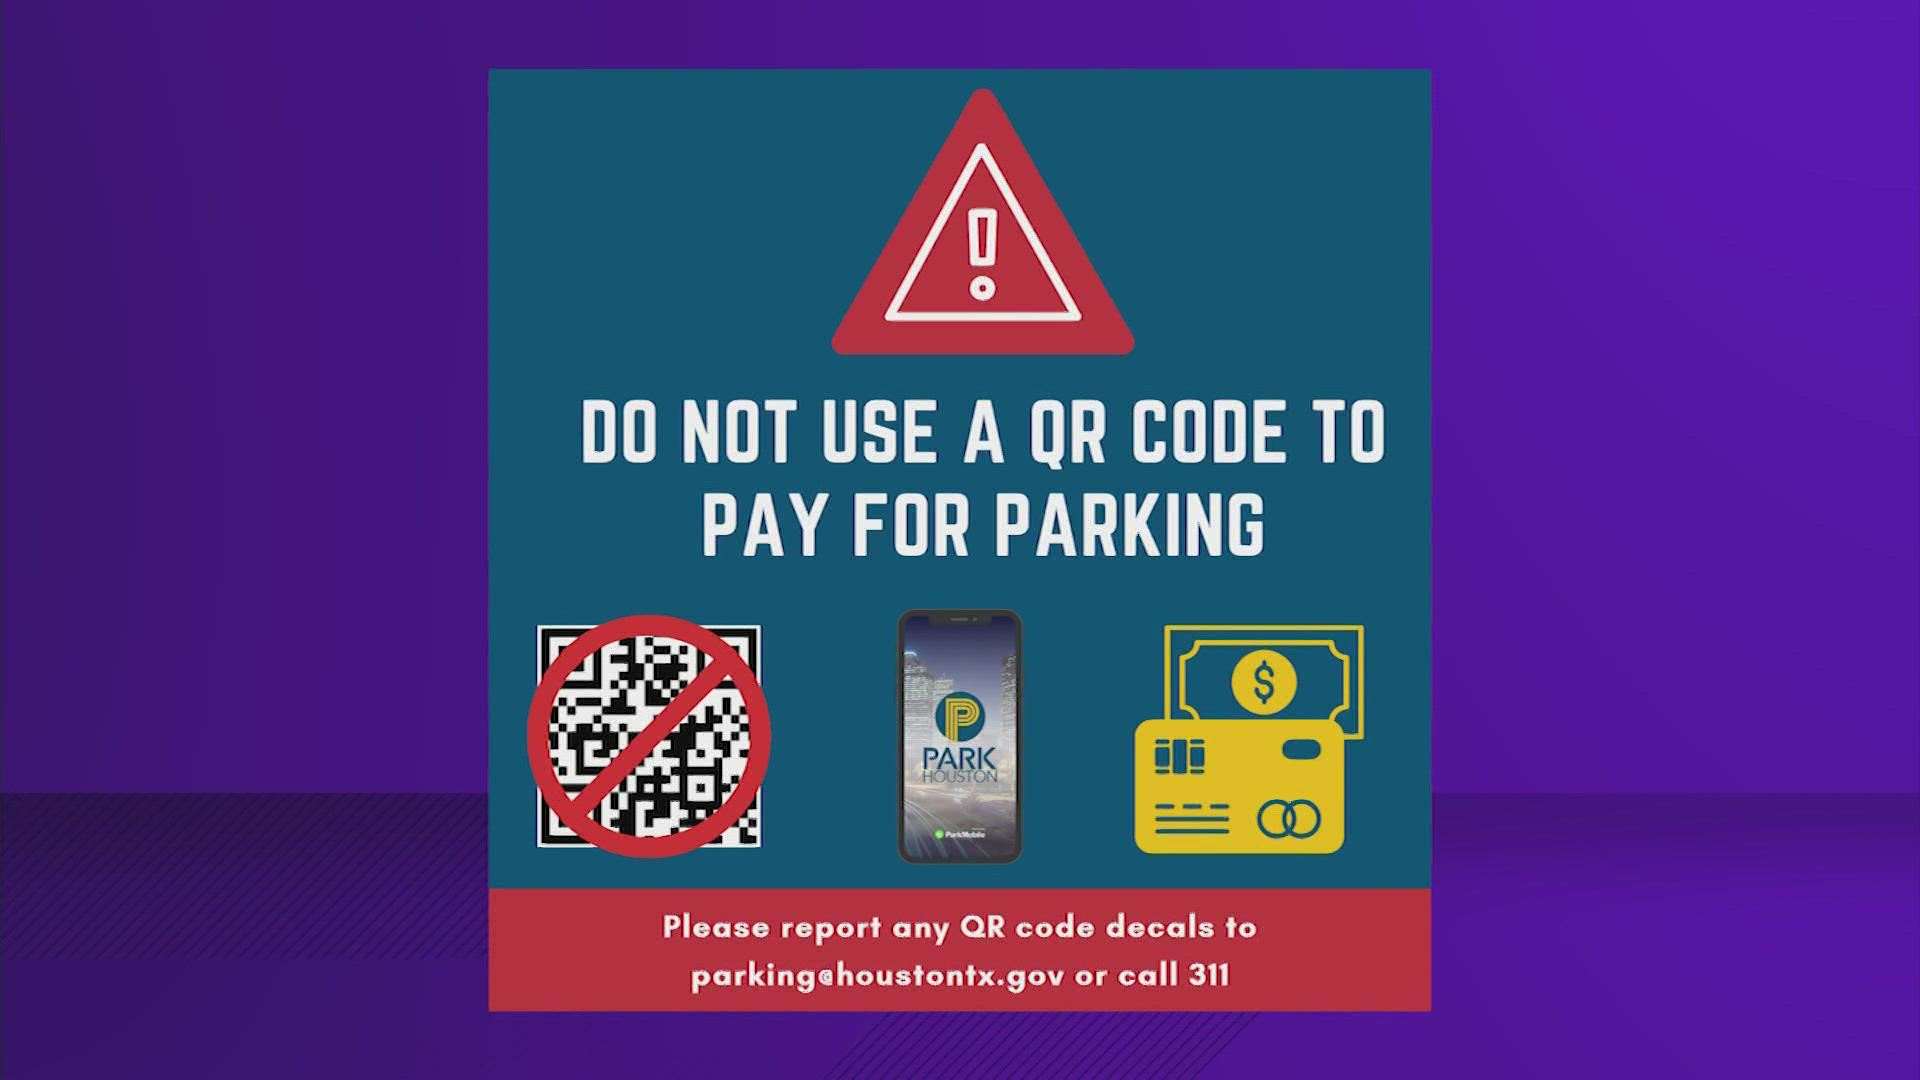 The city says they don't use QR codes to collect payment. They've not been seen in Houston yet, but they have been found in Austin and San Antonio.